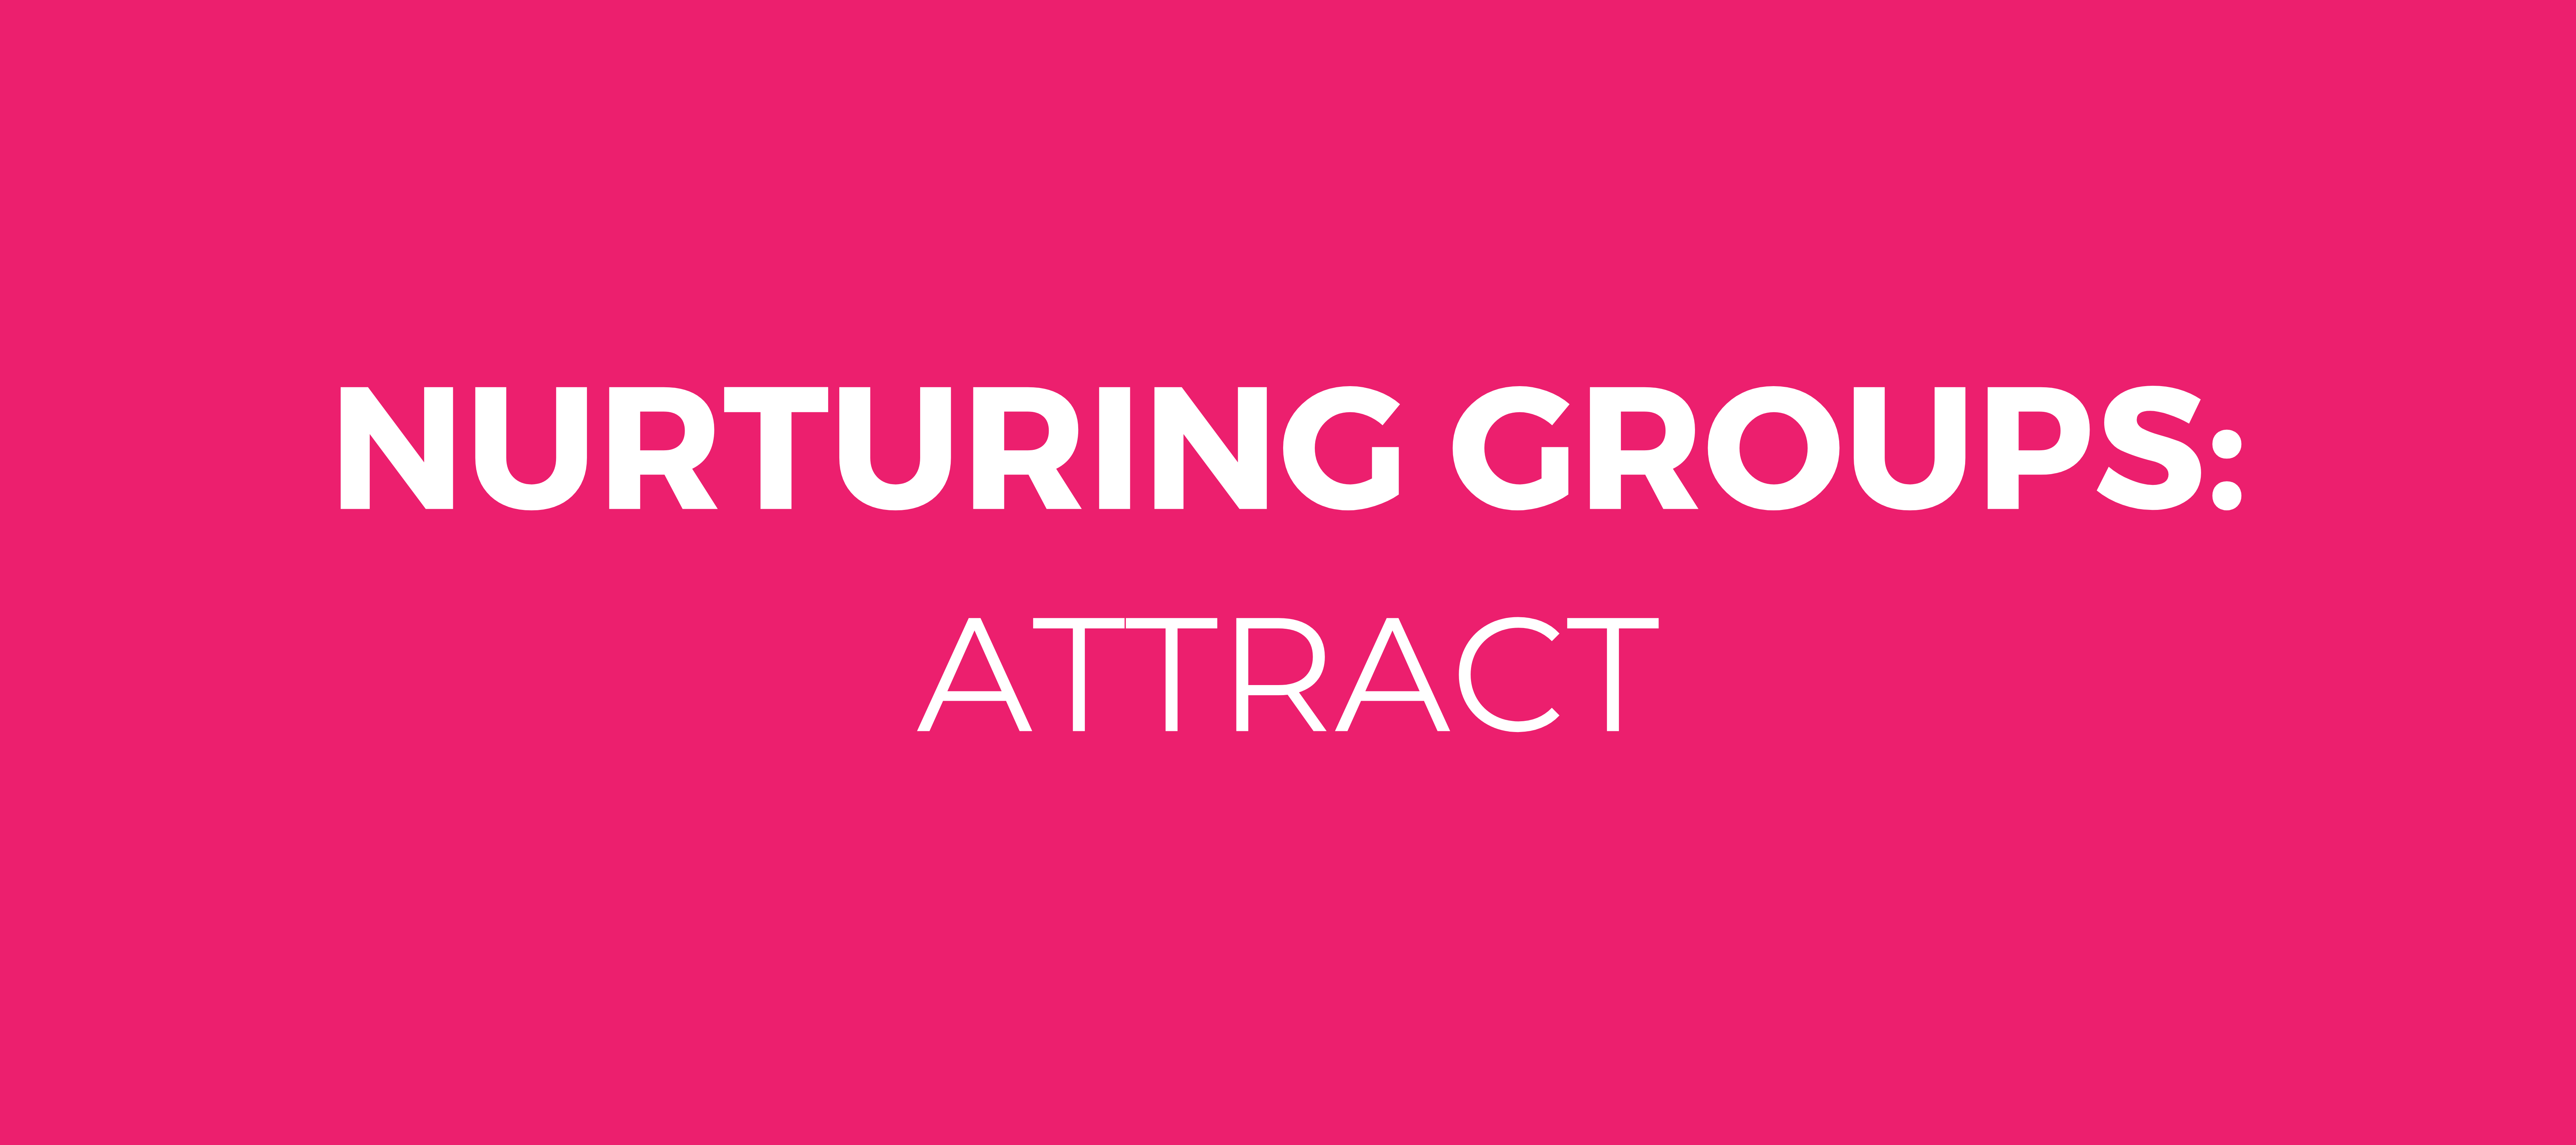 Nurturing groups - attracting the right Group Champion